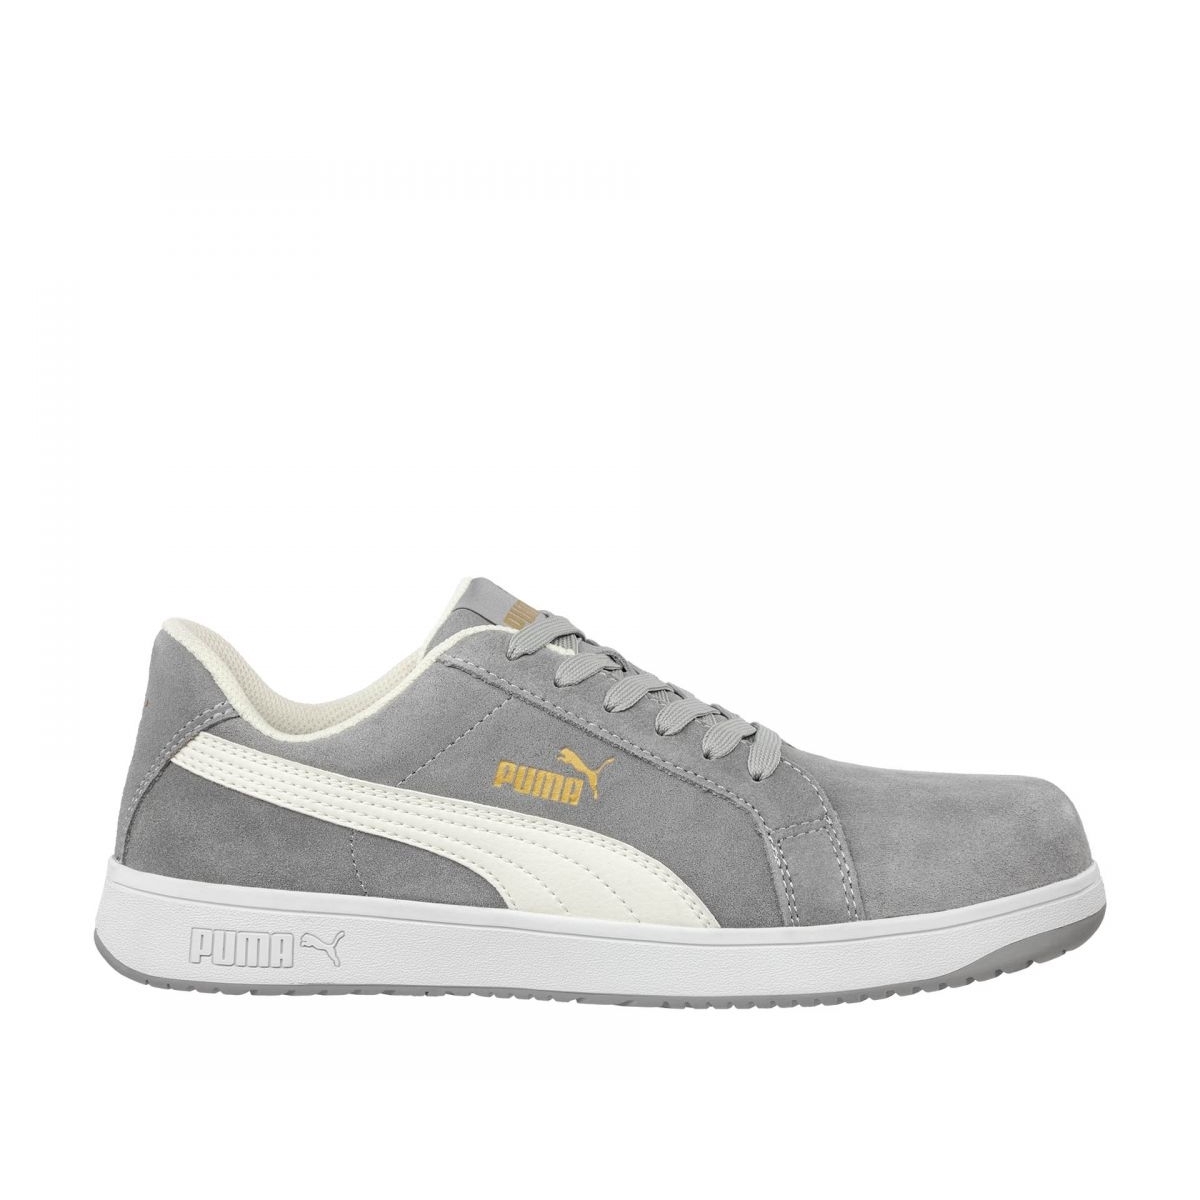 PUMA Safety Women's Iconic Low Composite Toe SD Work Shoes Grey Suede - 640125 Grey - Grey, 8.5